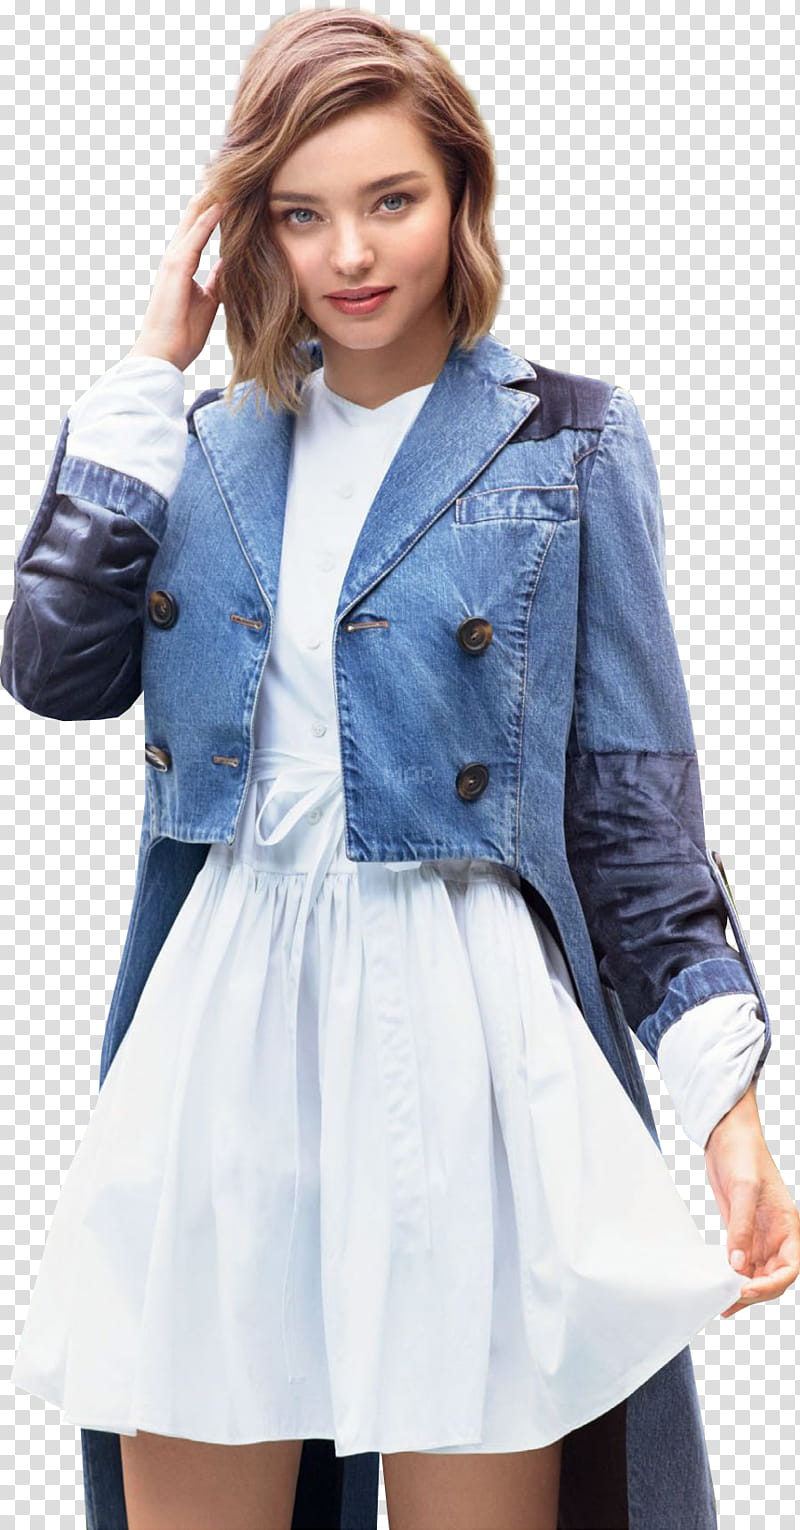 Miranda Kerr, woman in blue denim jacket and white dress transparent background PNG clipart